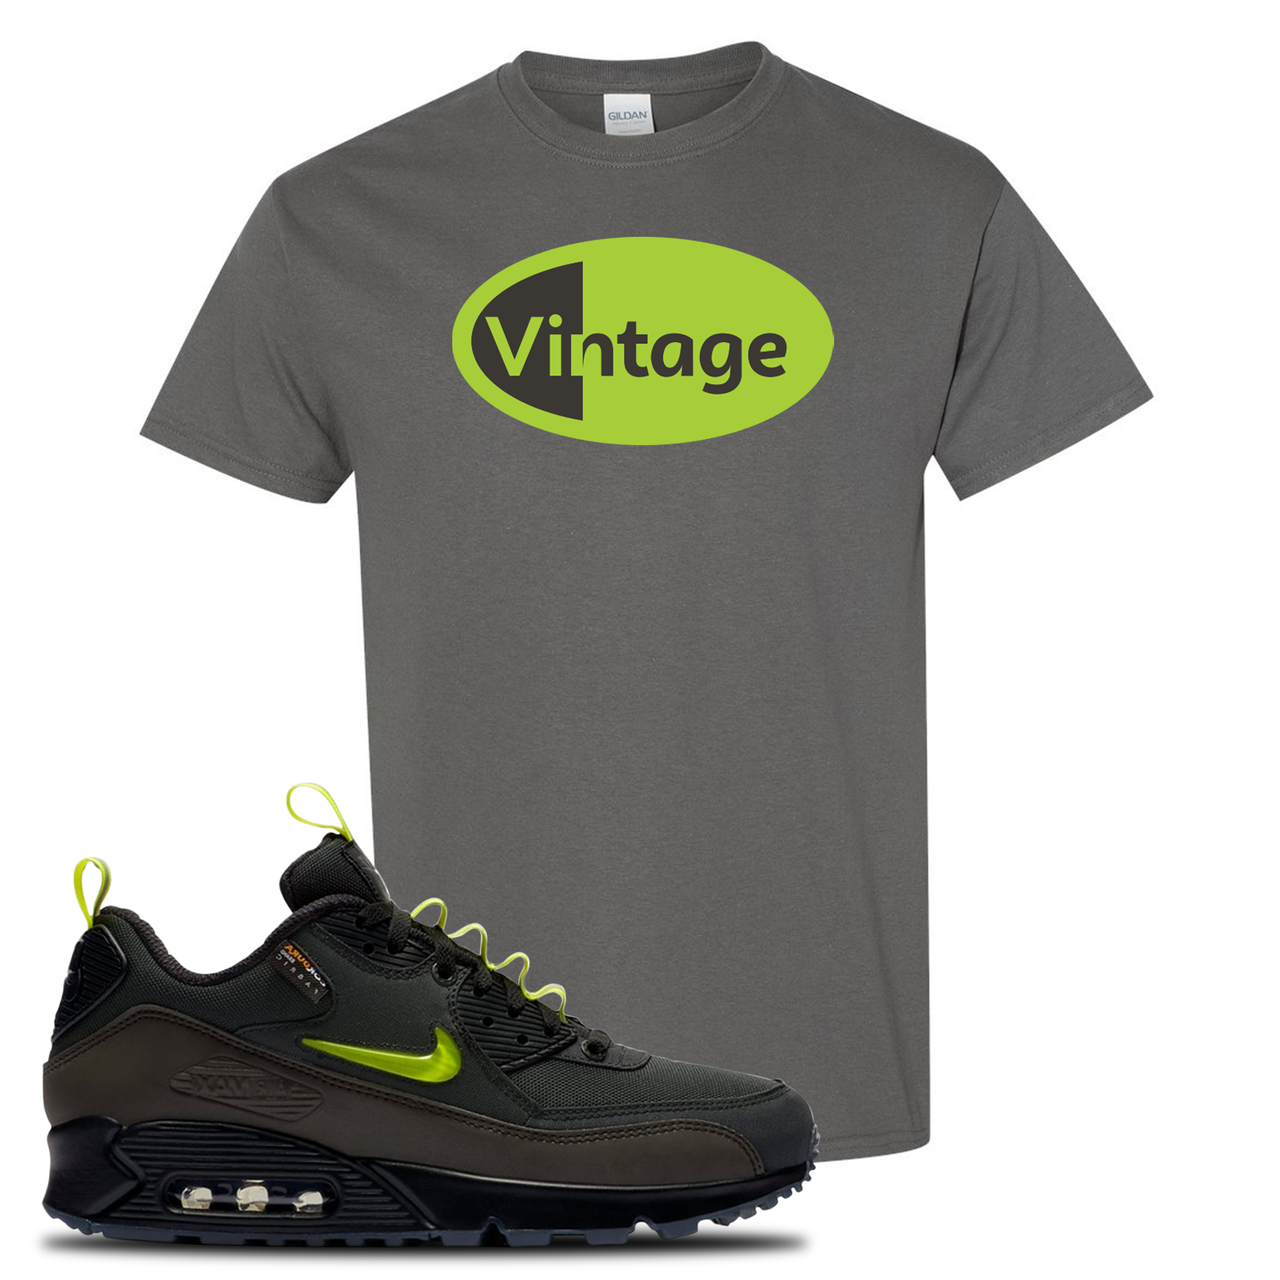 The Basement X Air Max 90 Manchester Vintage Oval Charcoal Gray Sneaker Hook Up T-Shirt